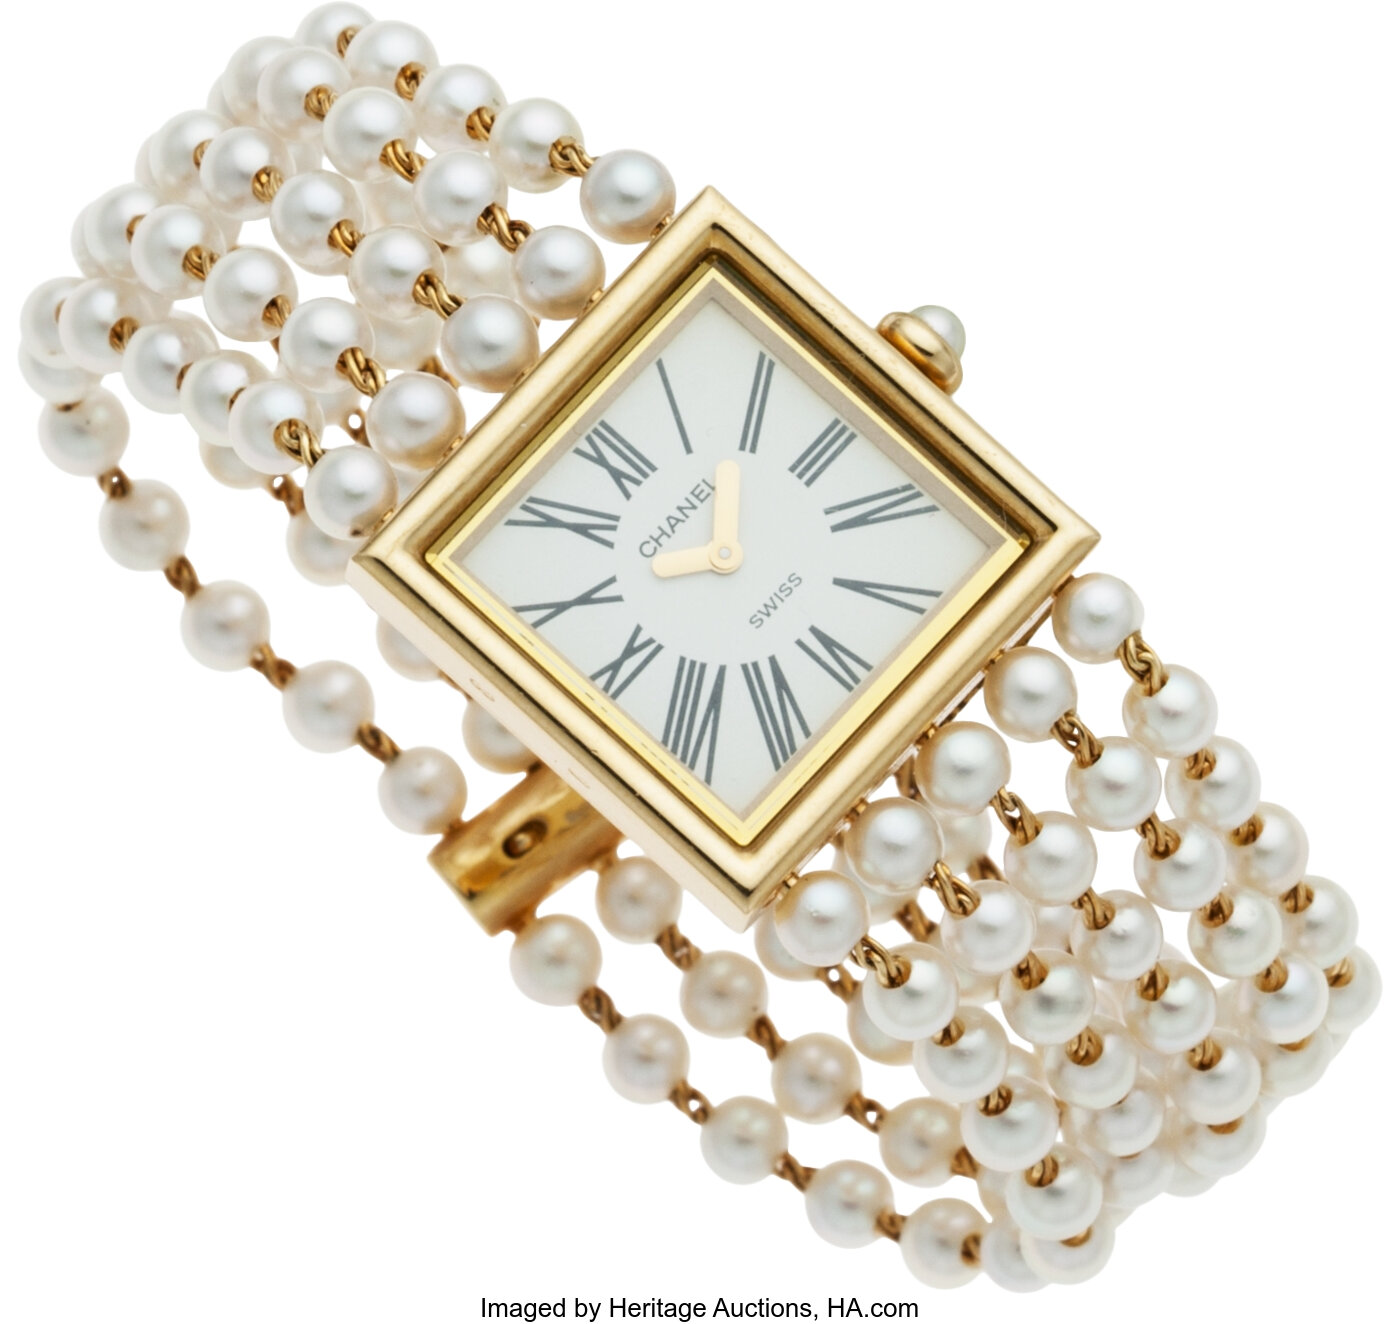 Chanel 18k Yellow Gold Mademoiselle Watch with Pearl Strap